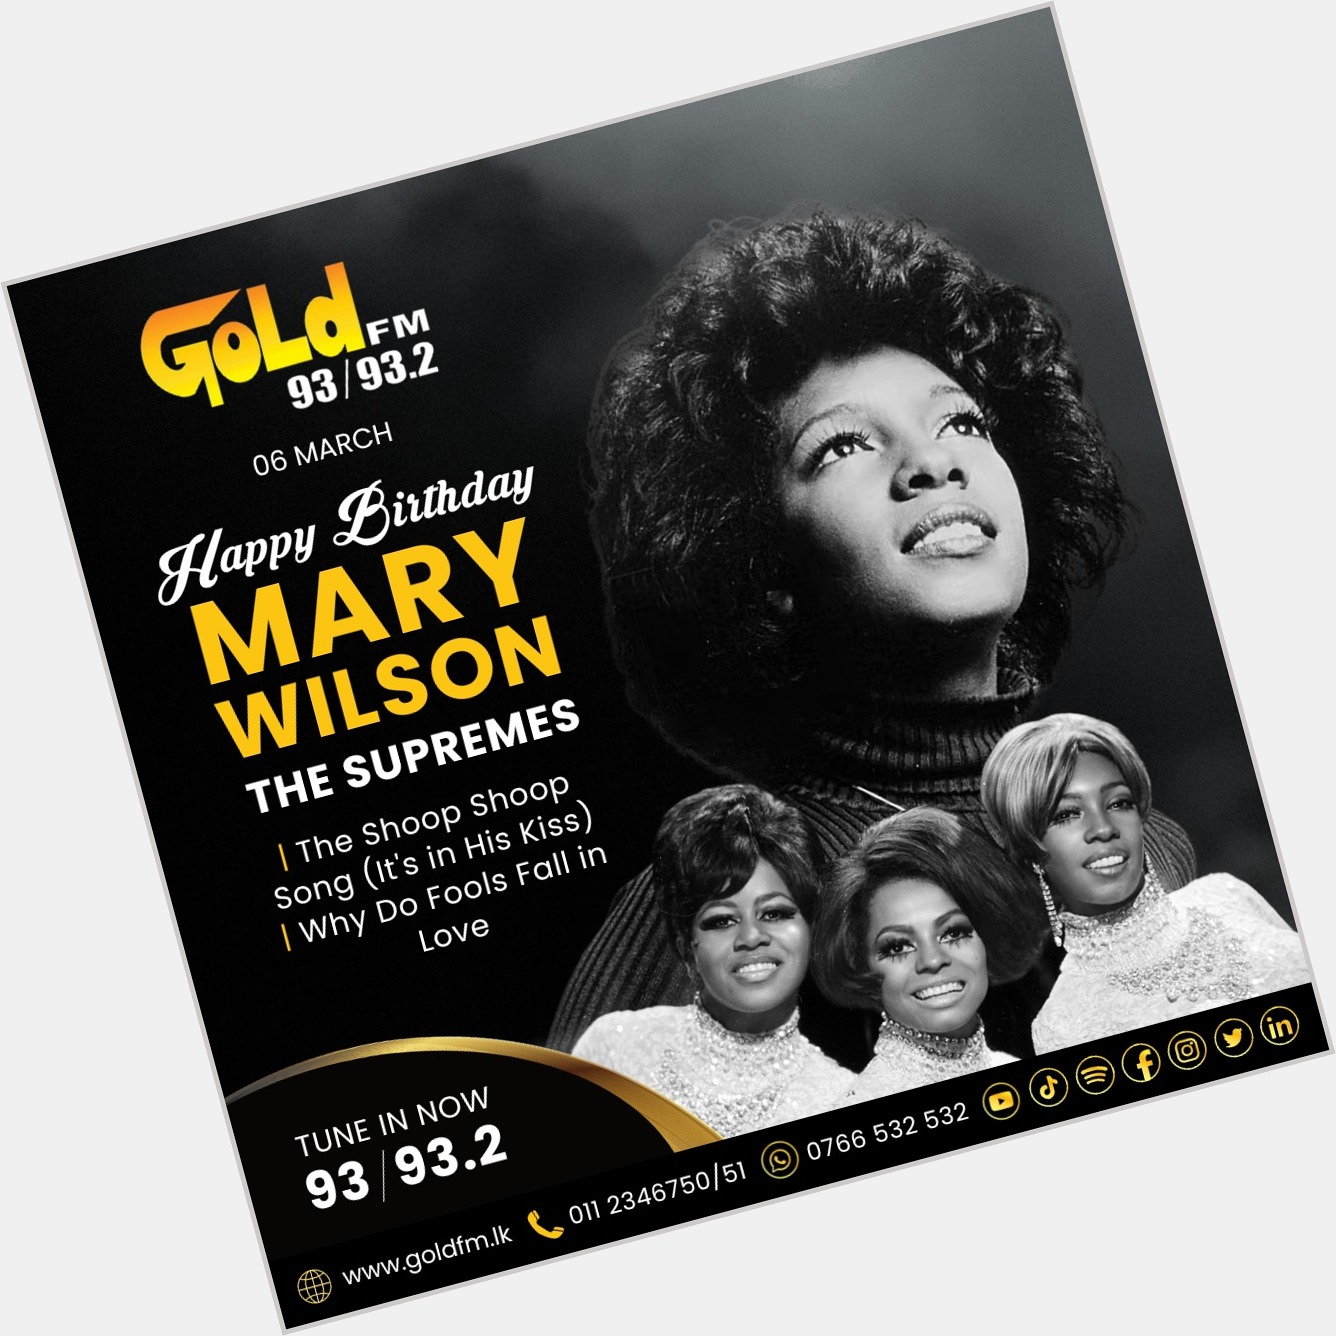 HAPPY BIRTHDAY TO MARY WILSON TUNE IN NOW 93 / 93.2 Island wide      